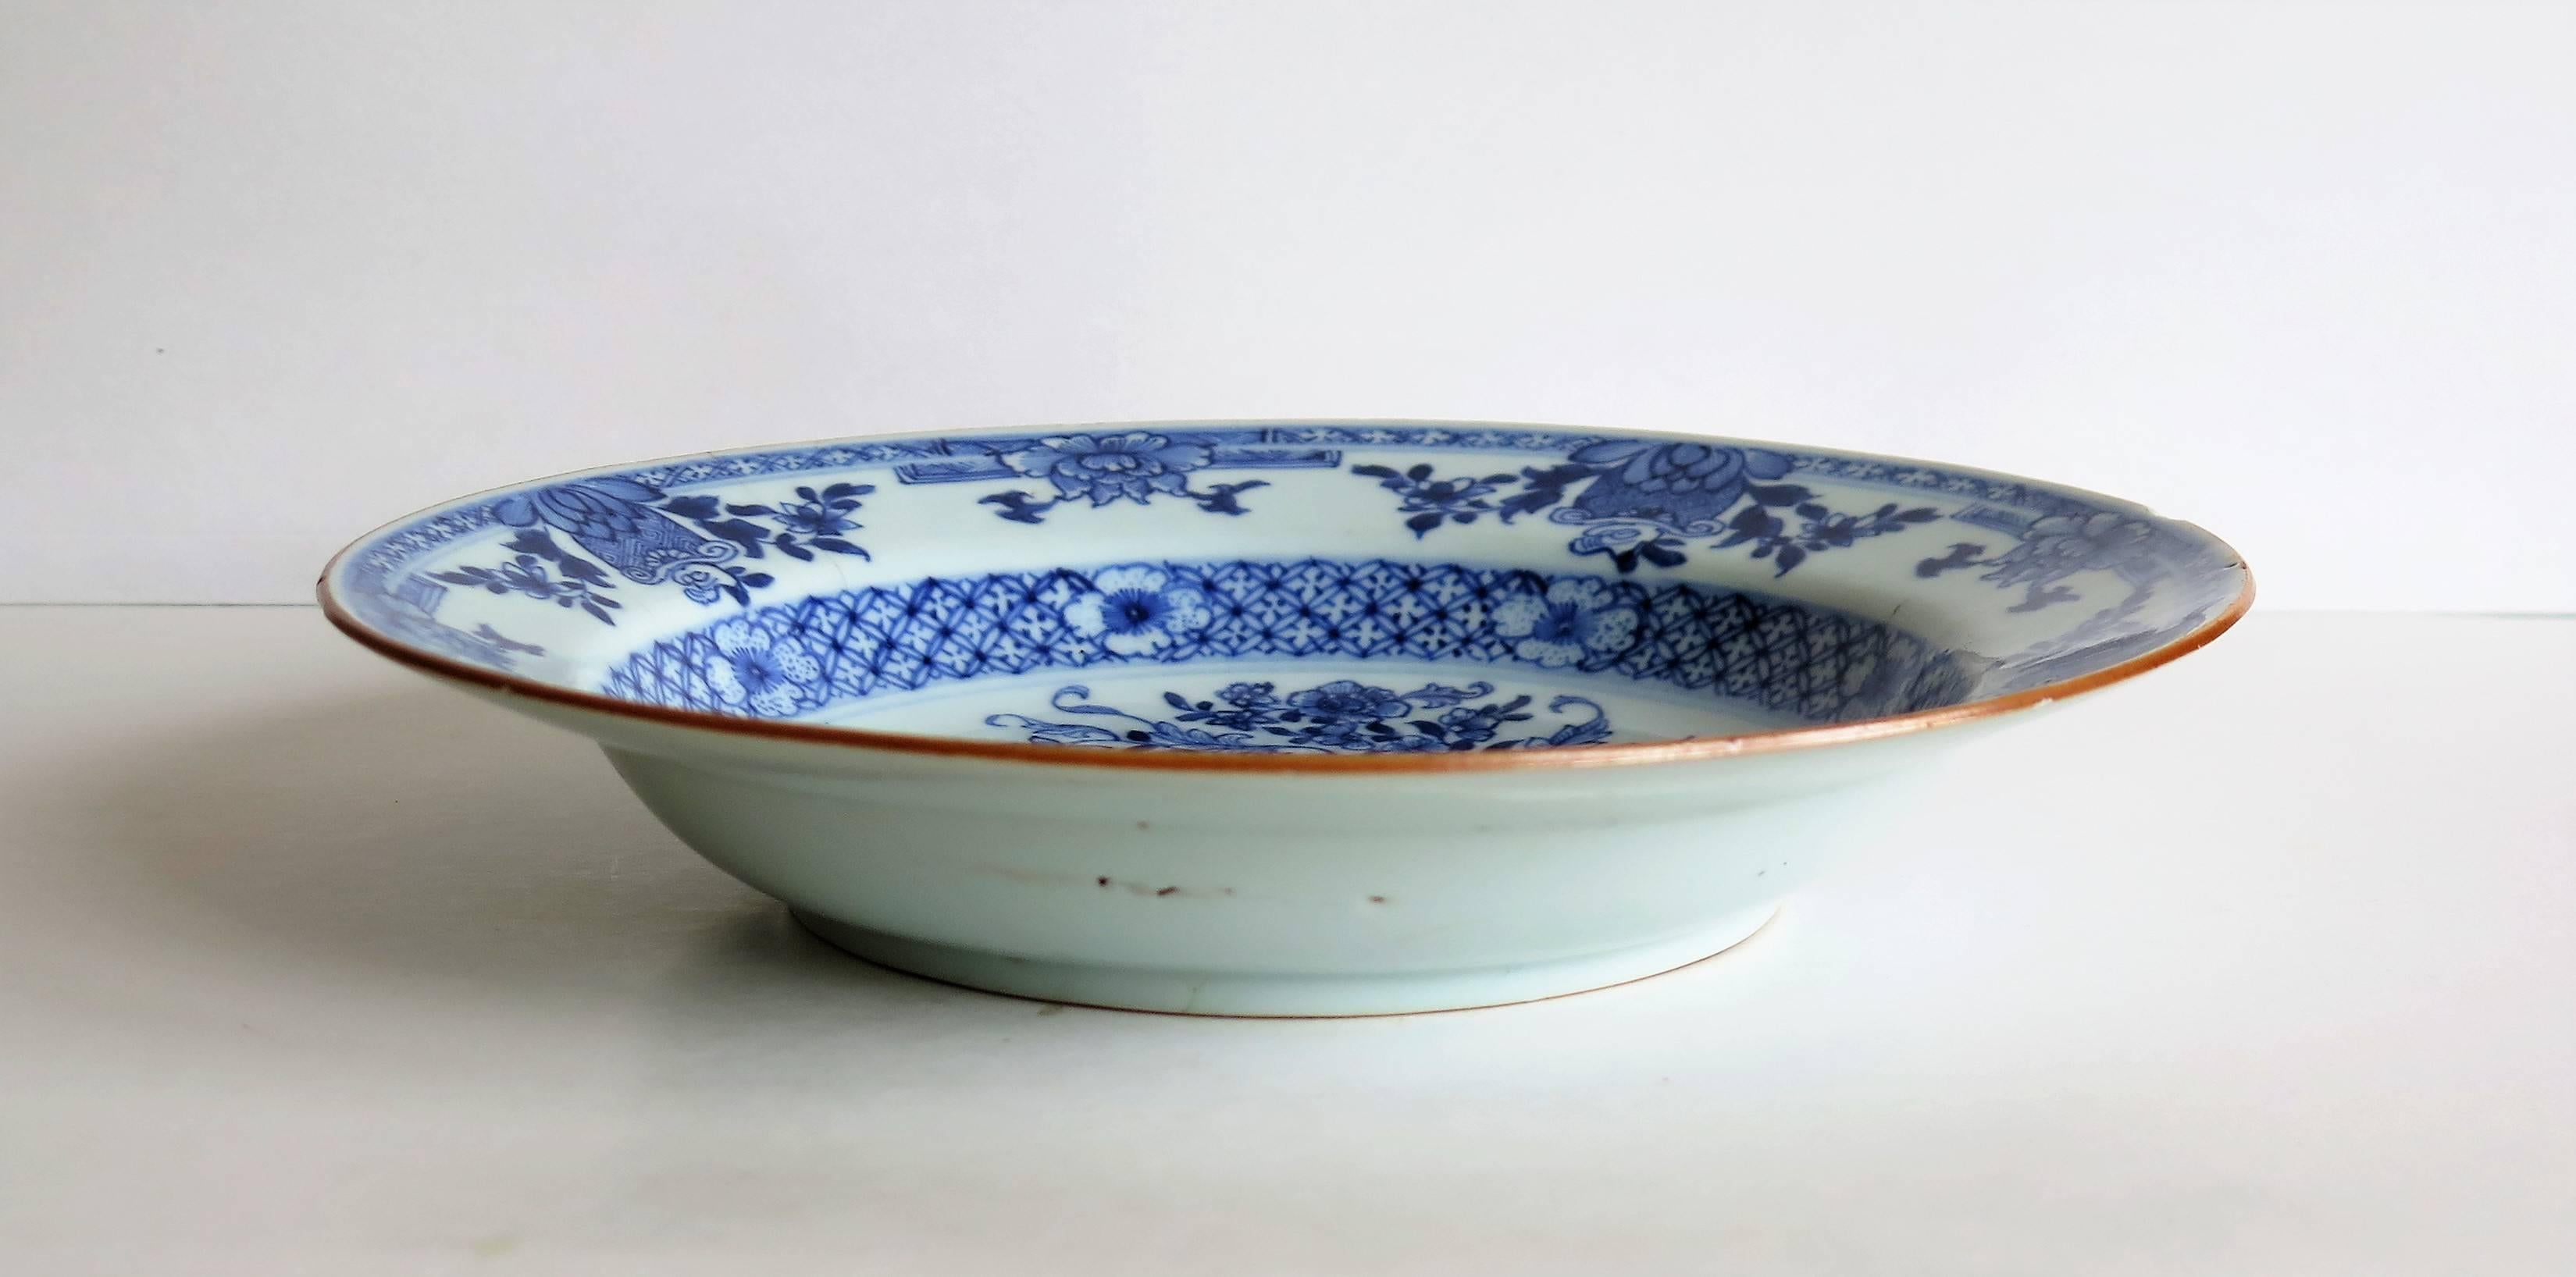 Chinese Porcelain Plate or Bowl, Blue and White, Floral Sprigs, circa 1770 3